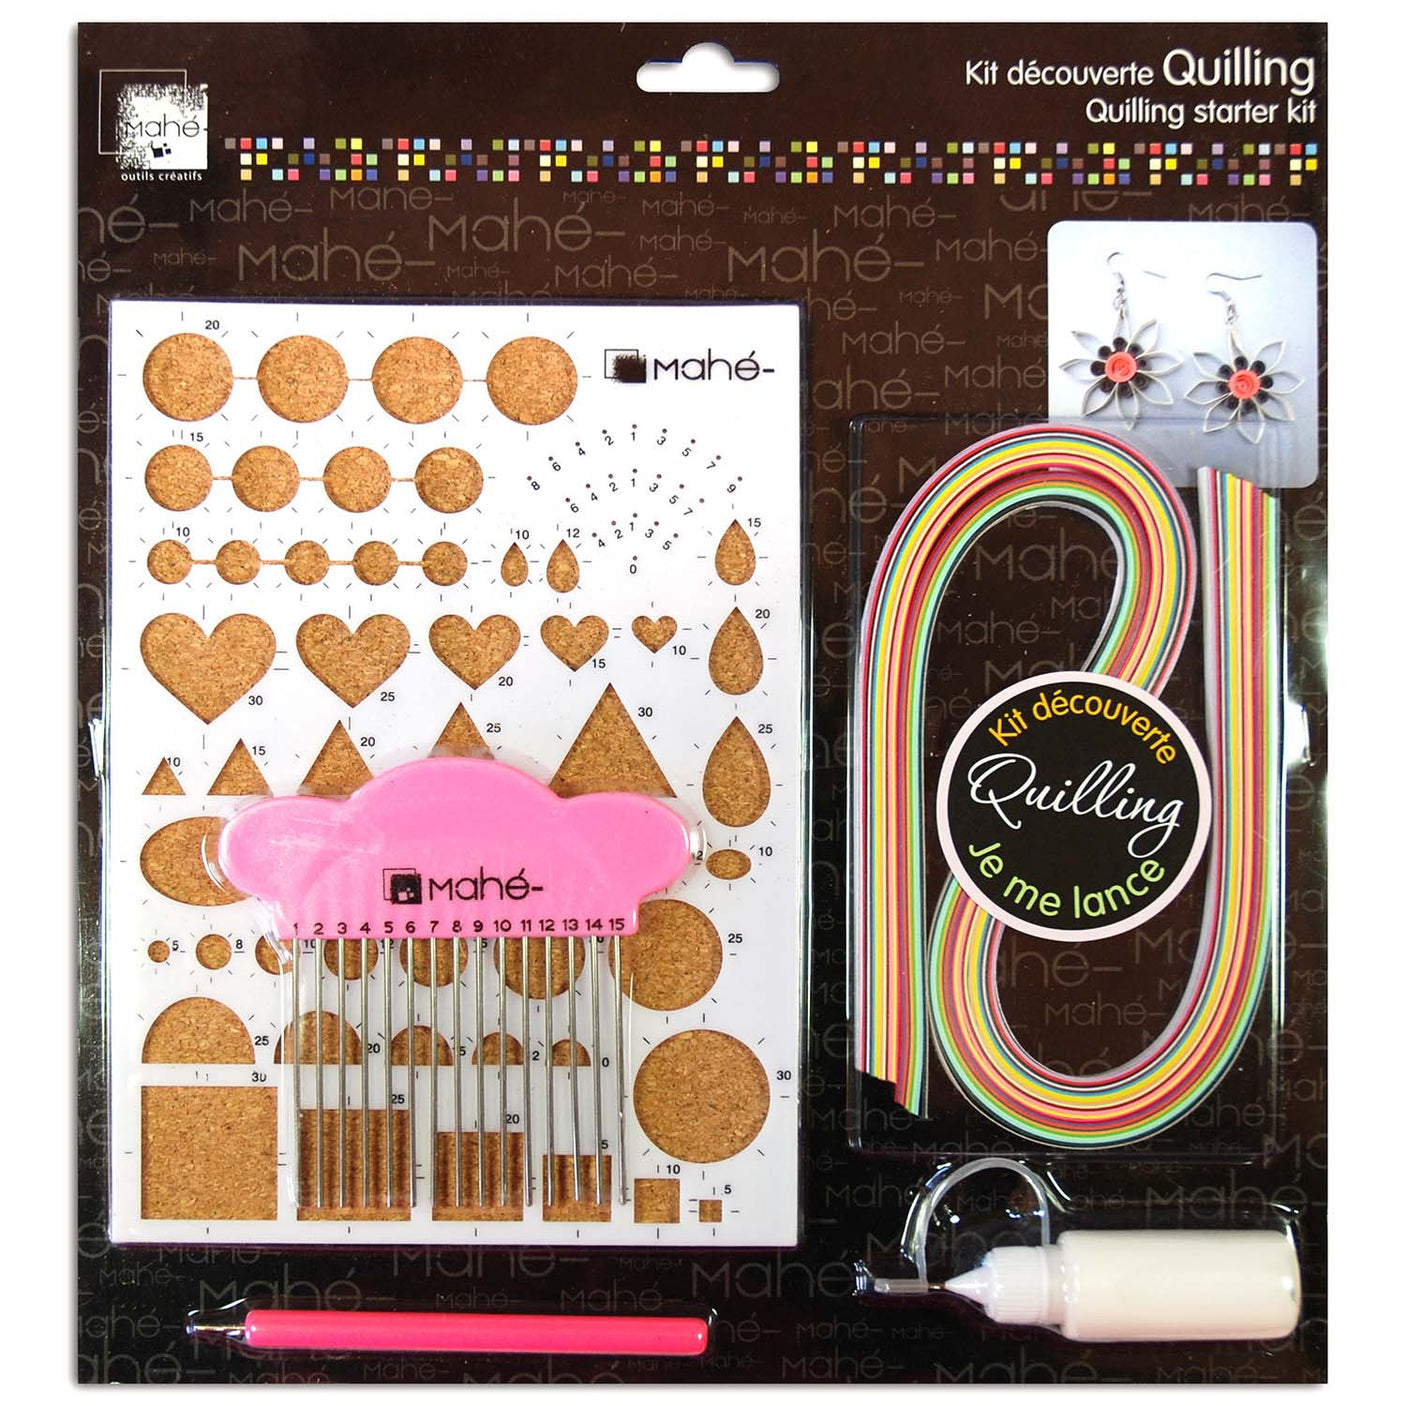 Quilling discovery kit